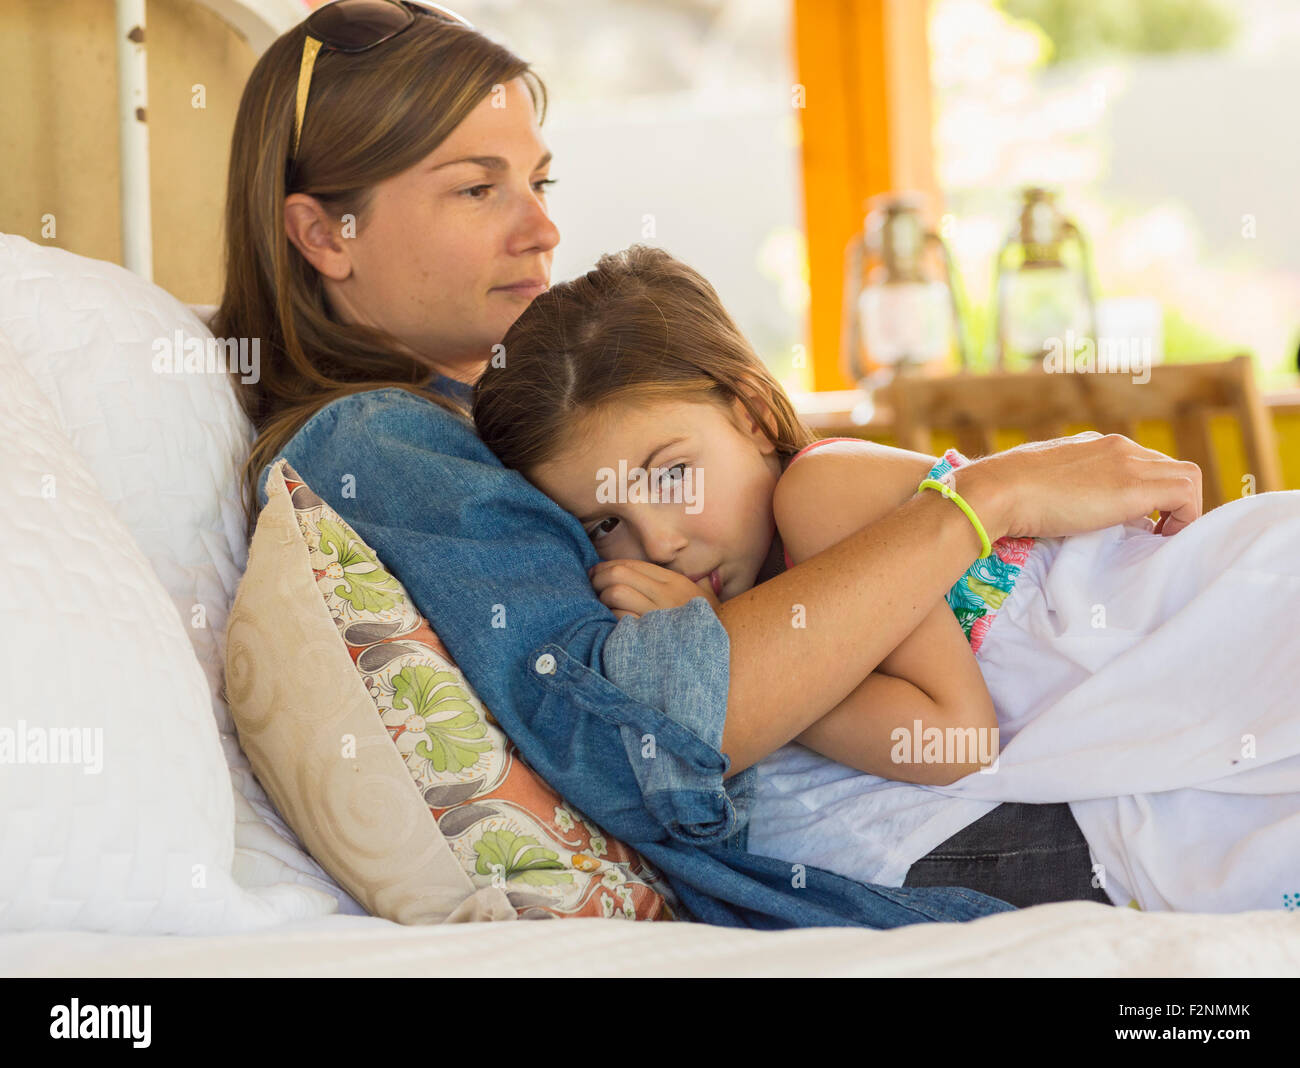 Mother comforting sad daughter on bed Stock Photo